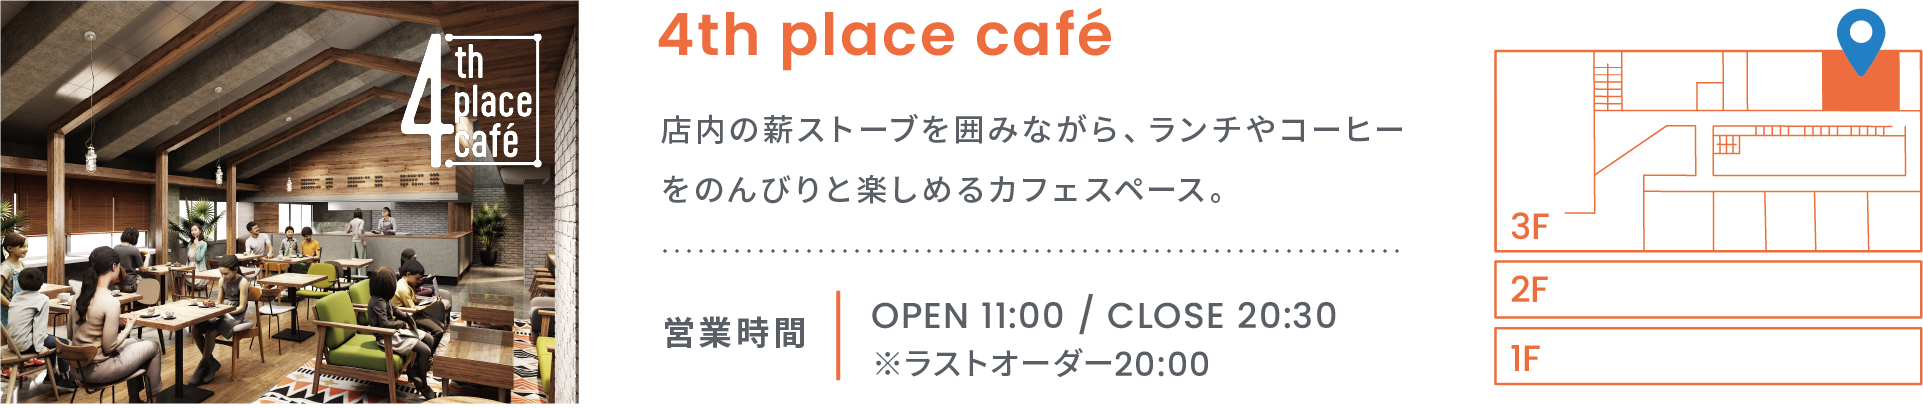 4th place cafe